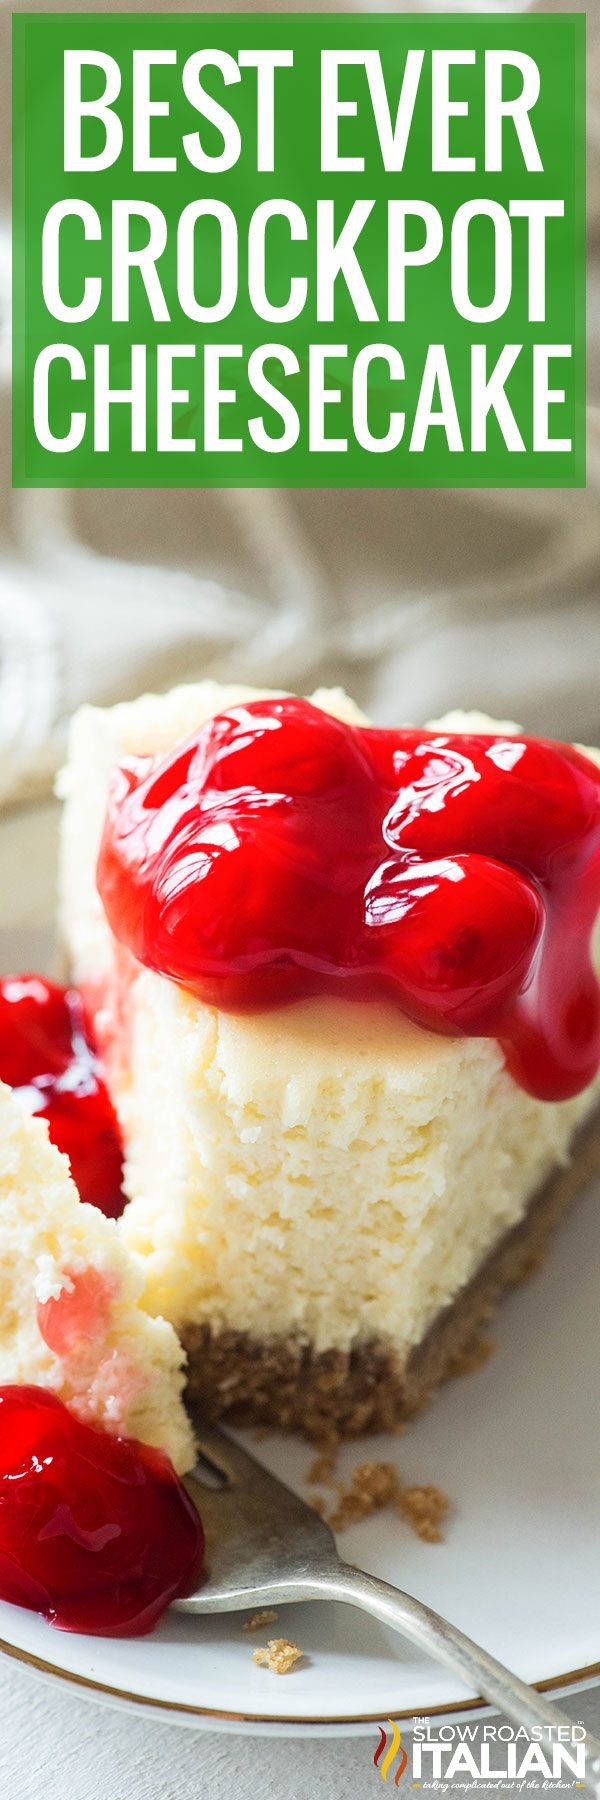 cheesecake with cherry topping on a plate